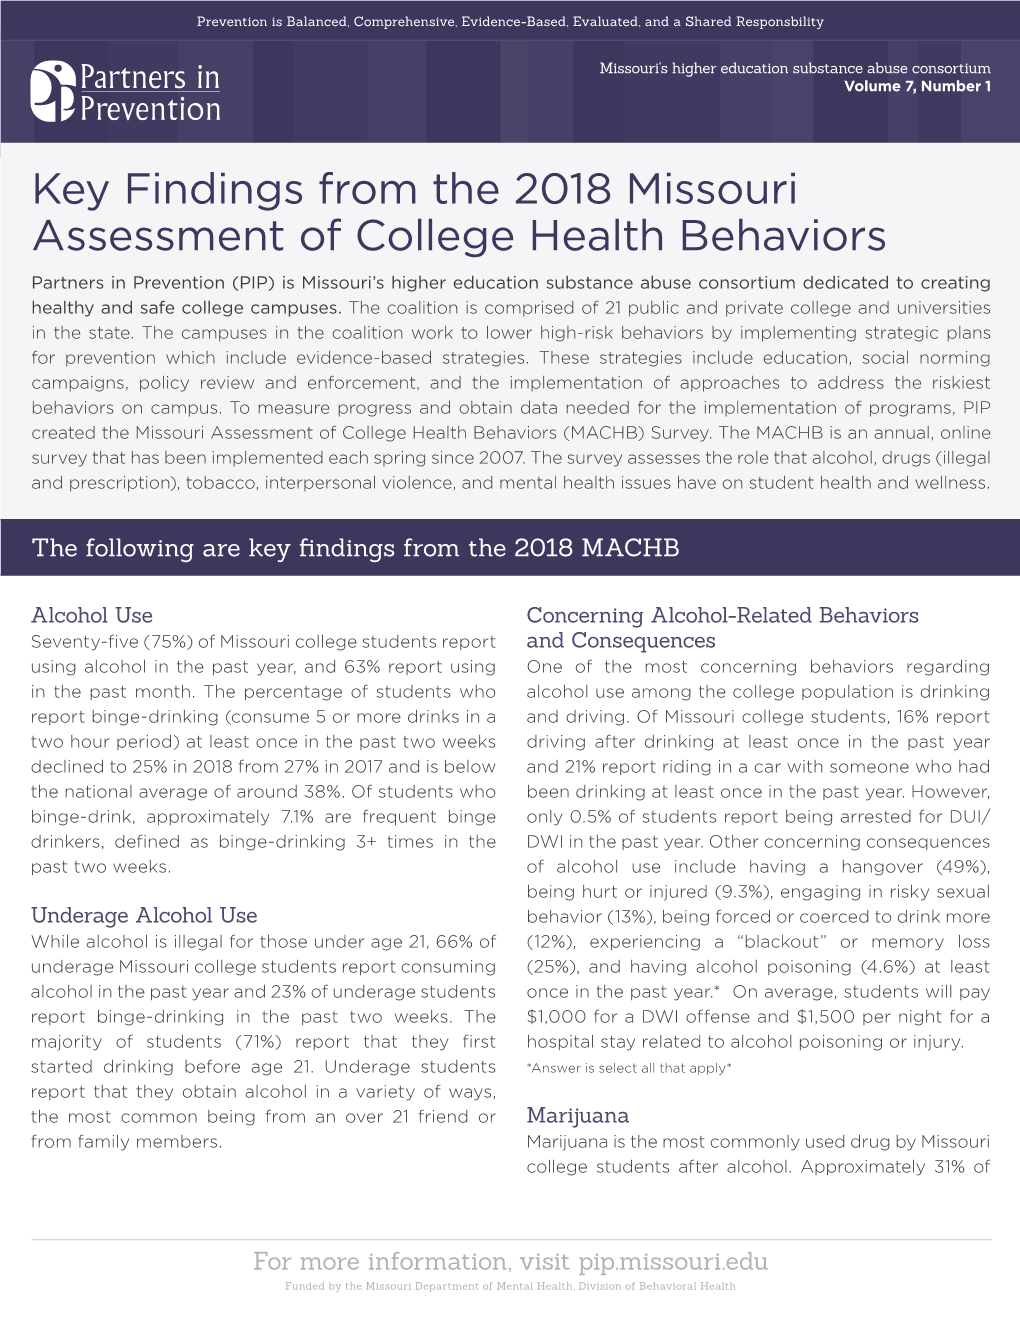 Key Findings from the 2018 Missouri Assessment of College Health